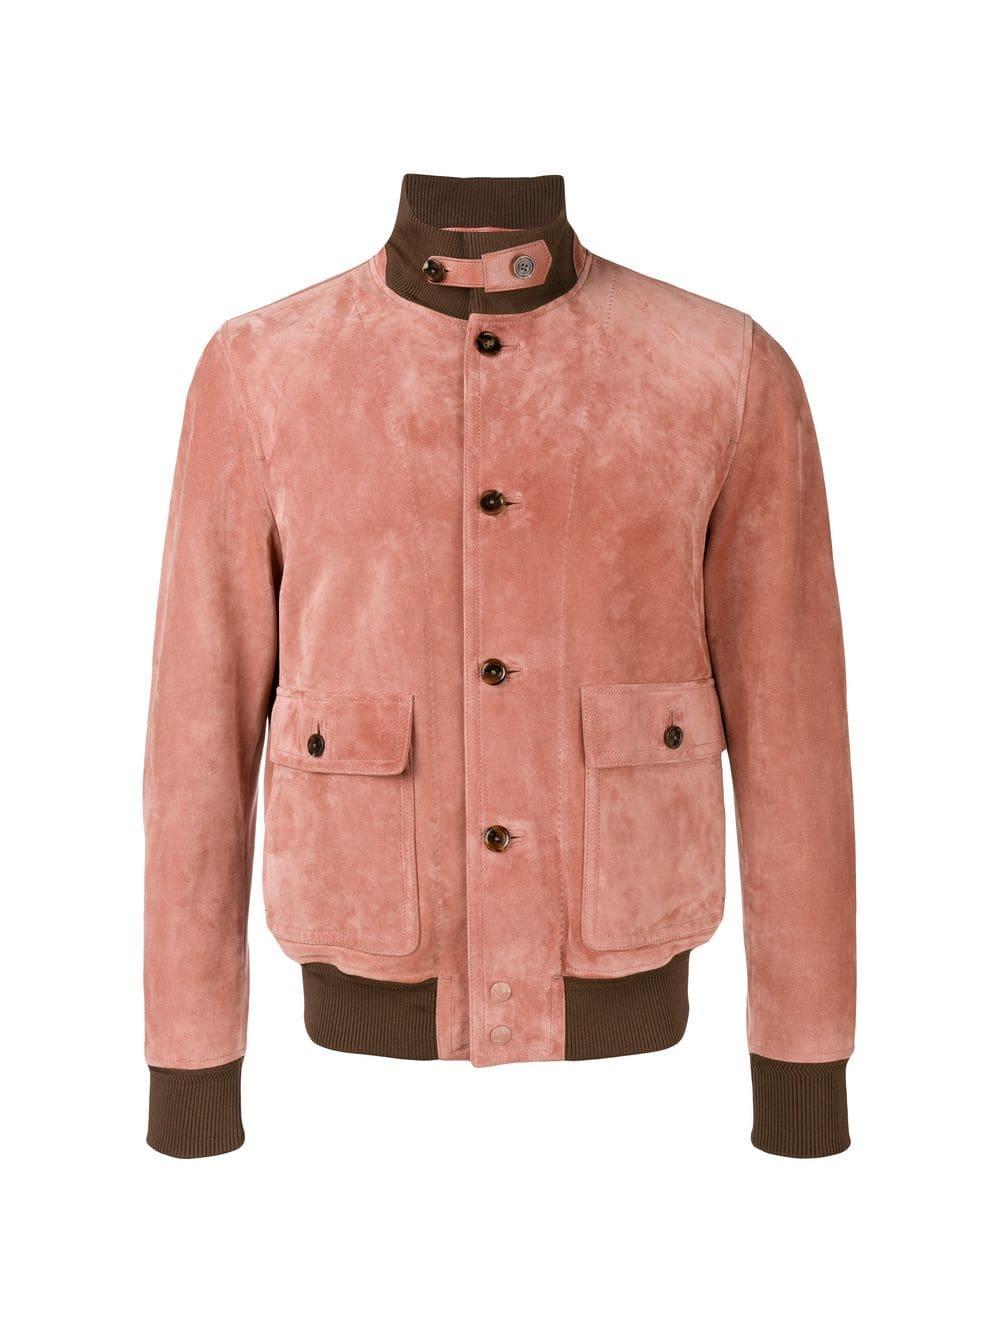 Tom Ford Suede Fitted Bomber Jacket in Pink for Men - Lyst